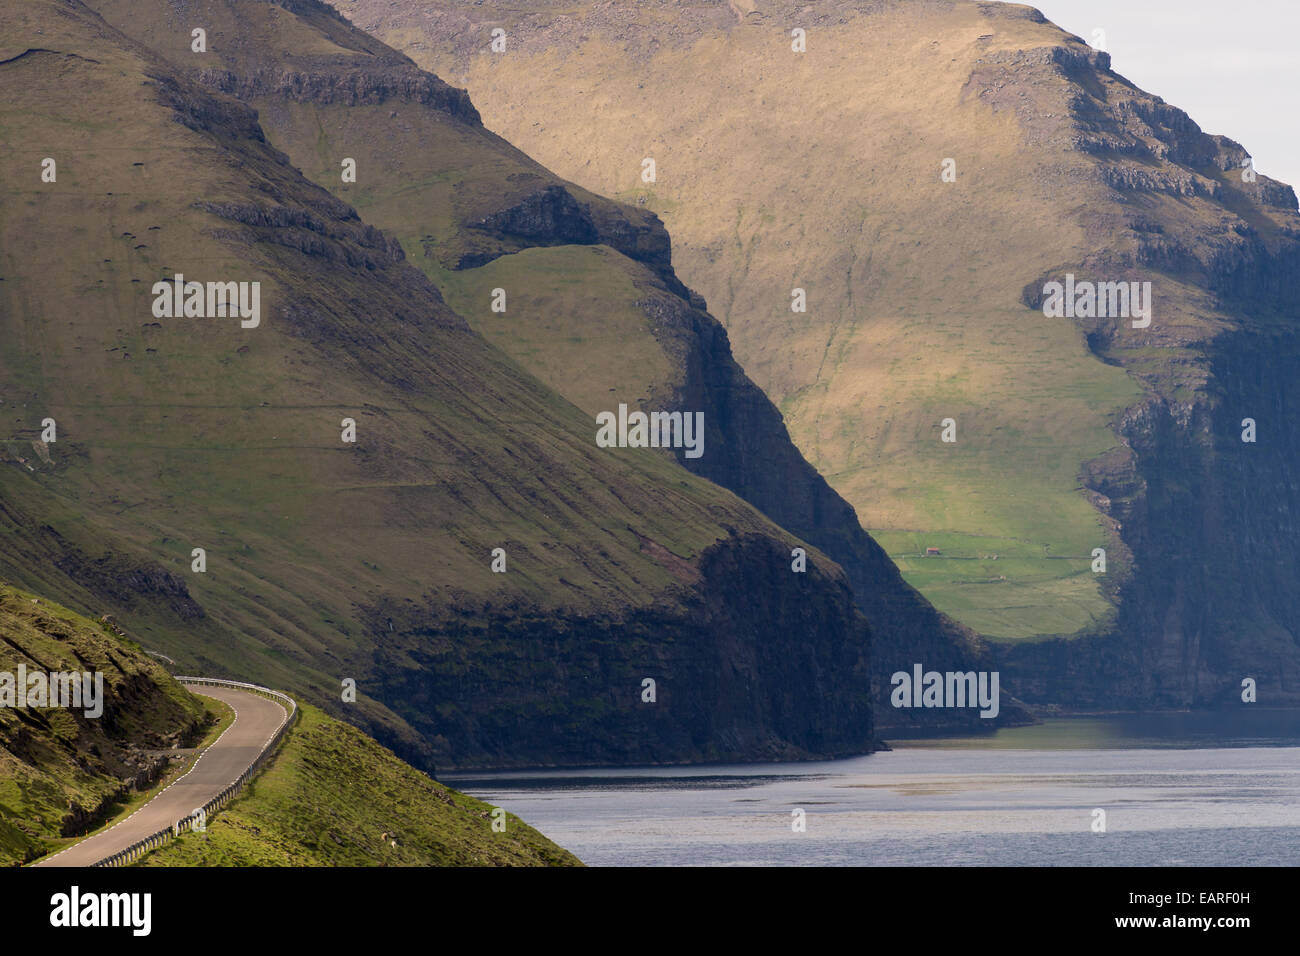 Road and mountains towering from the sea, Kalsoy, Norðoyar, Faroe Islands, Denmark Stock Photo